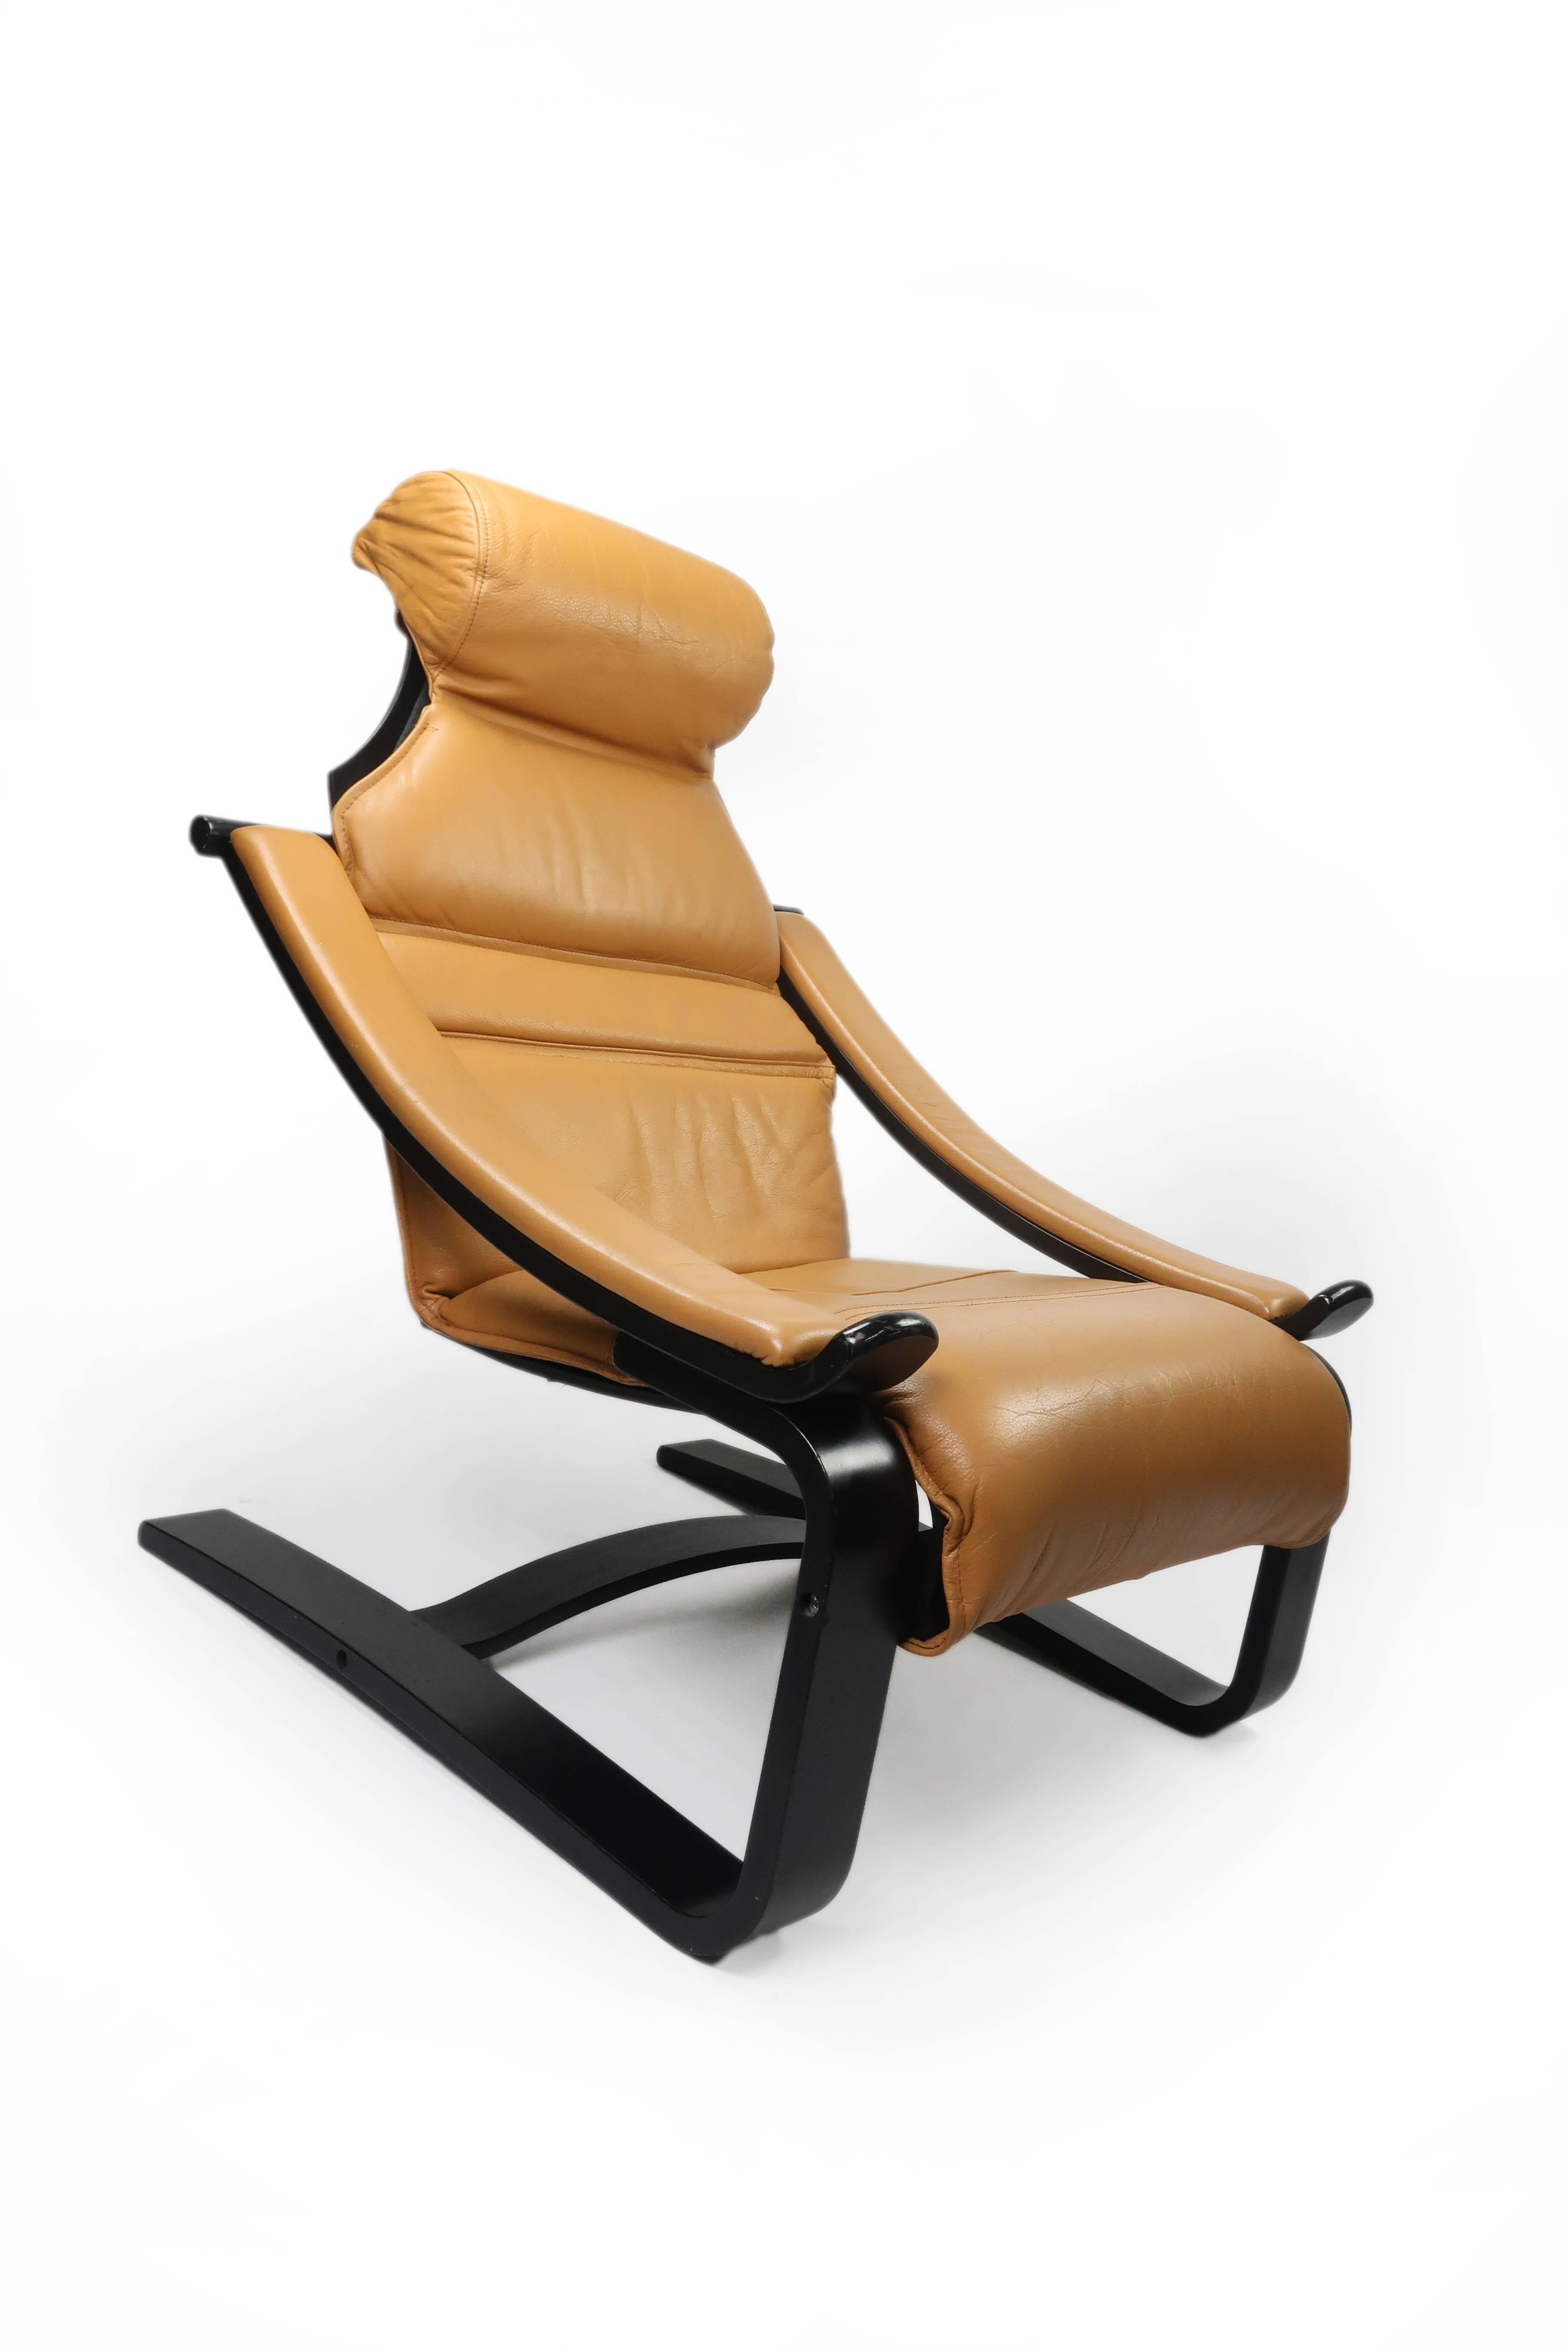 Scandinavian Modern Gregory Cantilevered Leather Lounge Chair by Scanform